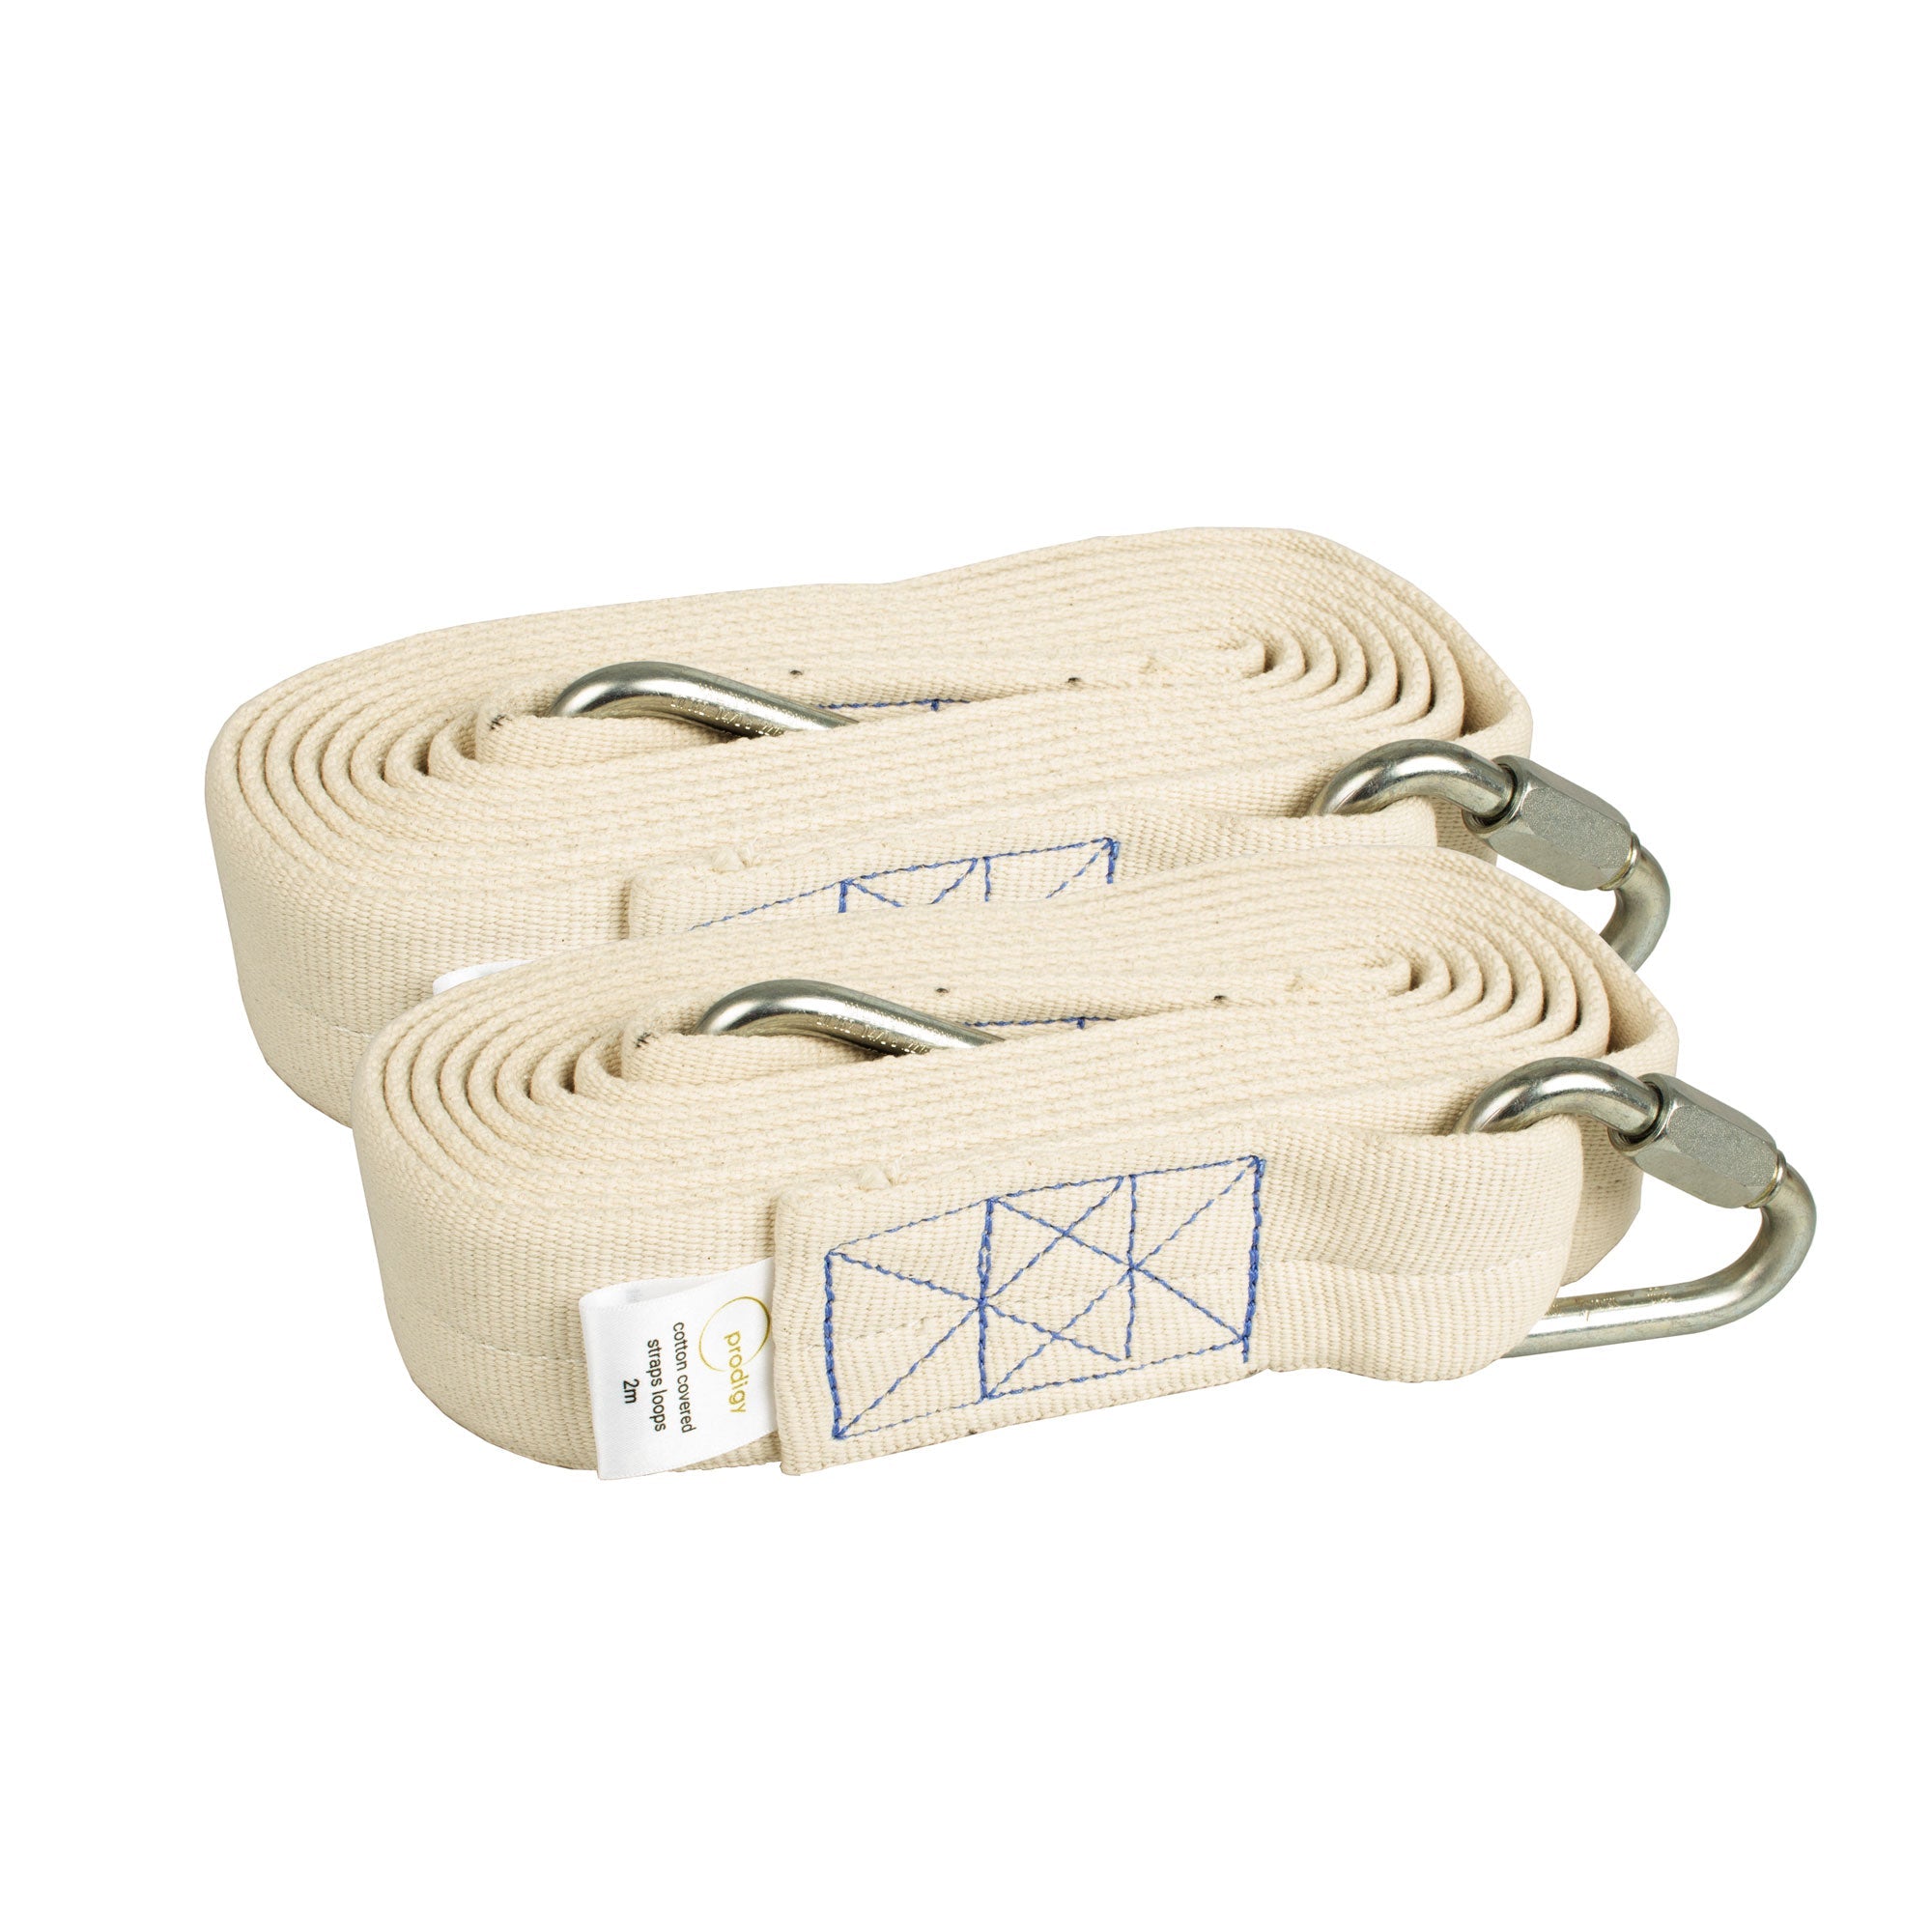 Prodigy cotton covered aerial loops 200cm coiled up